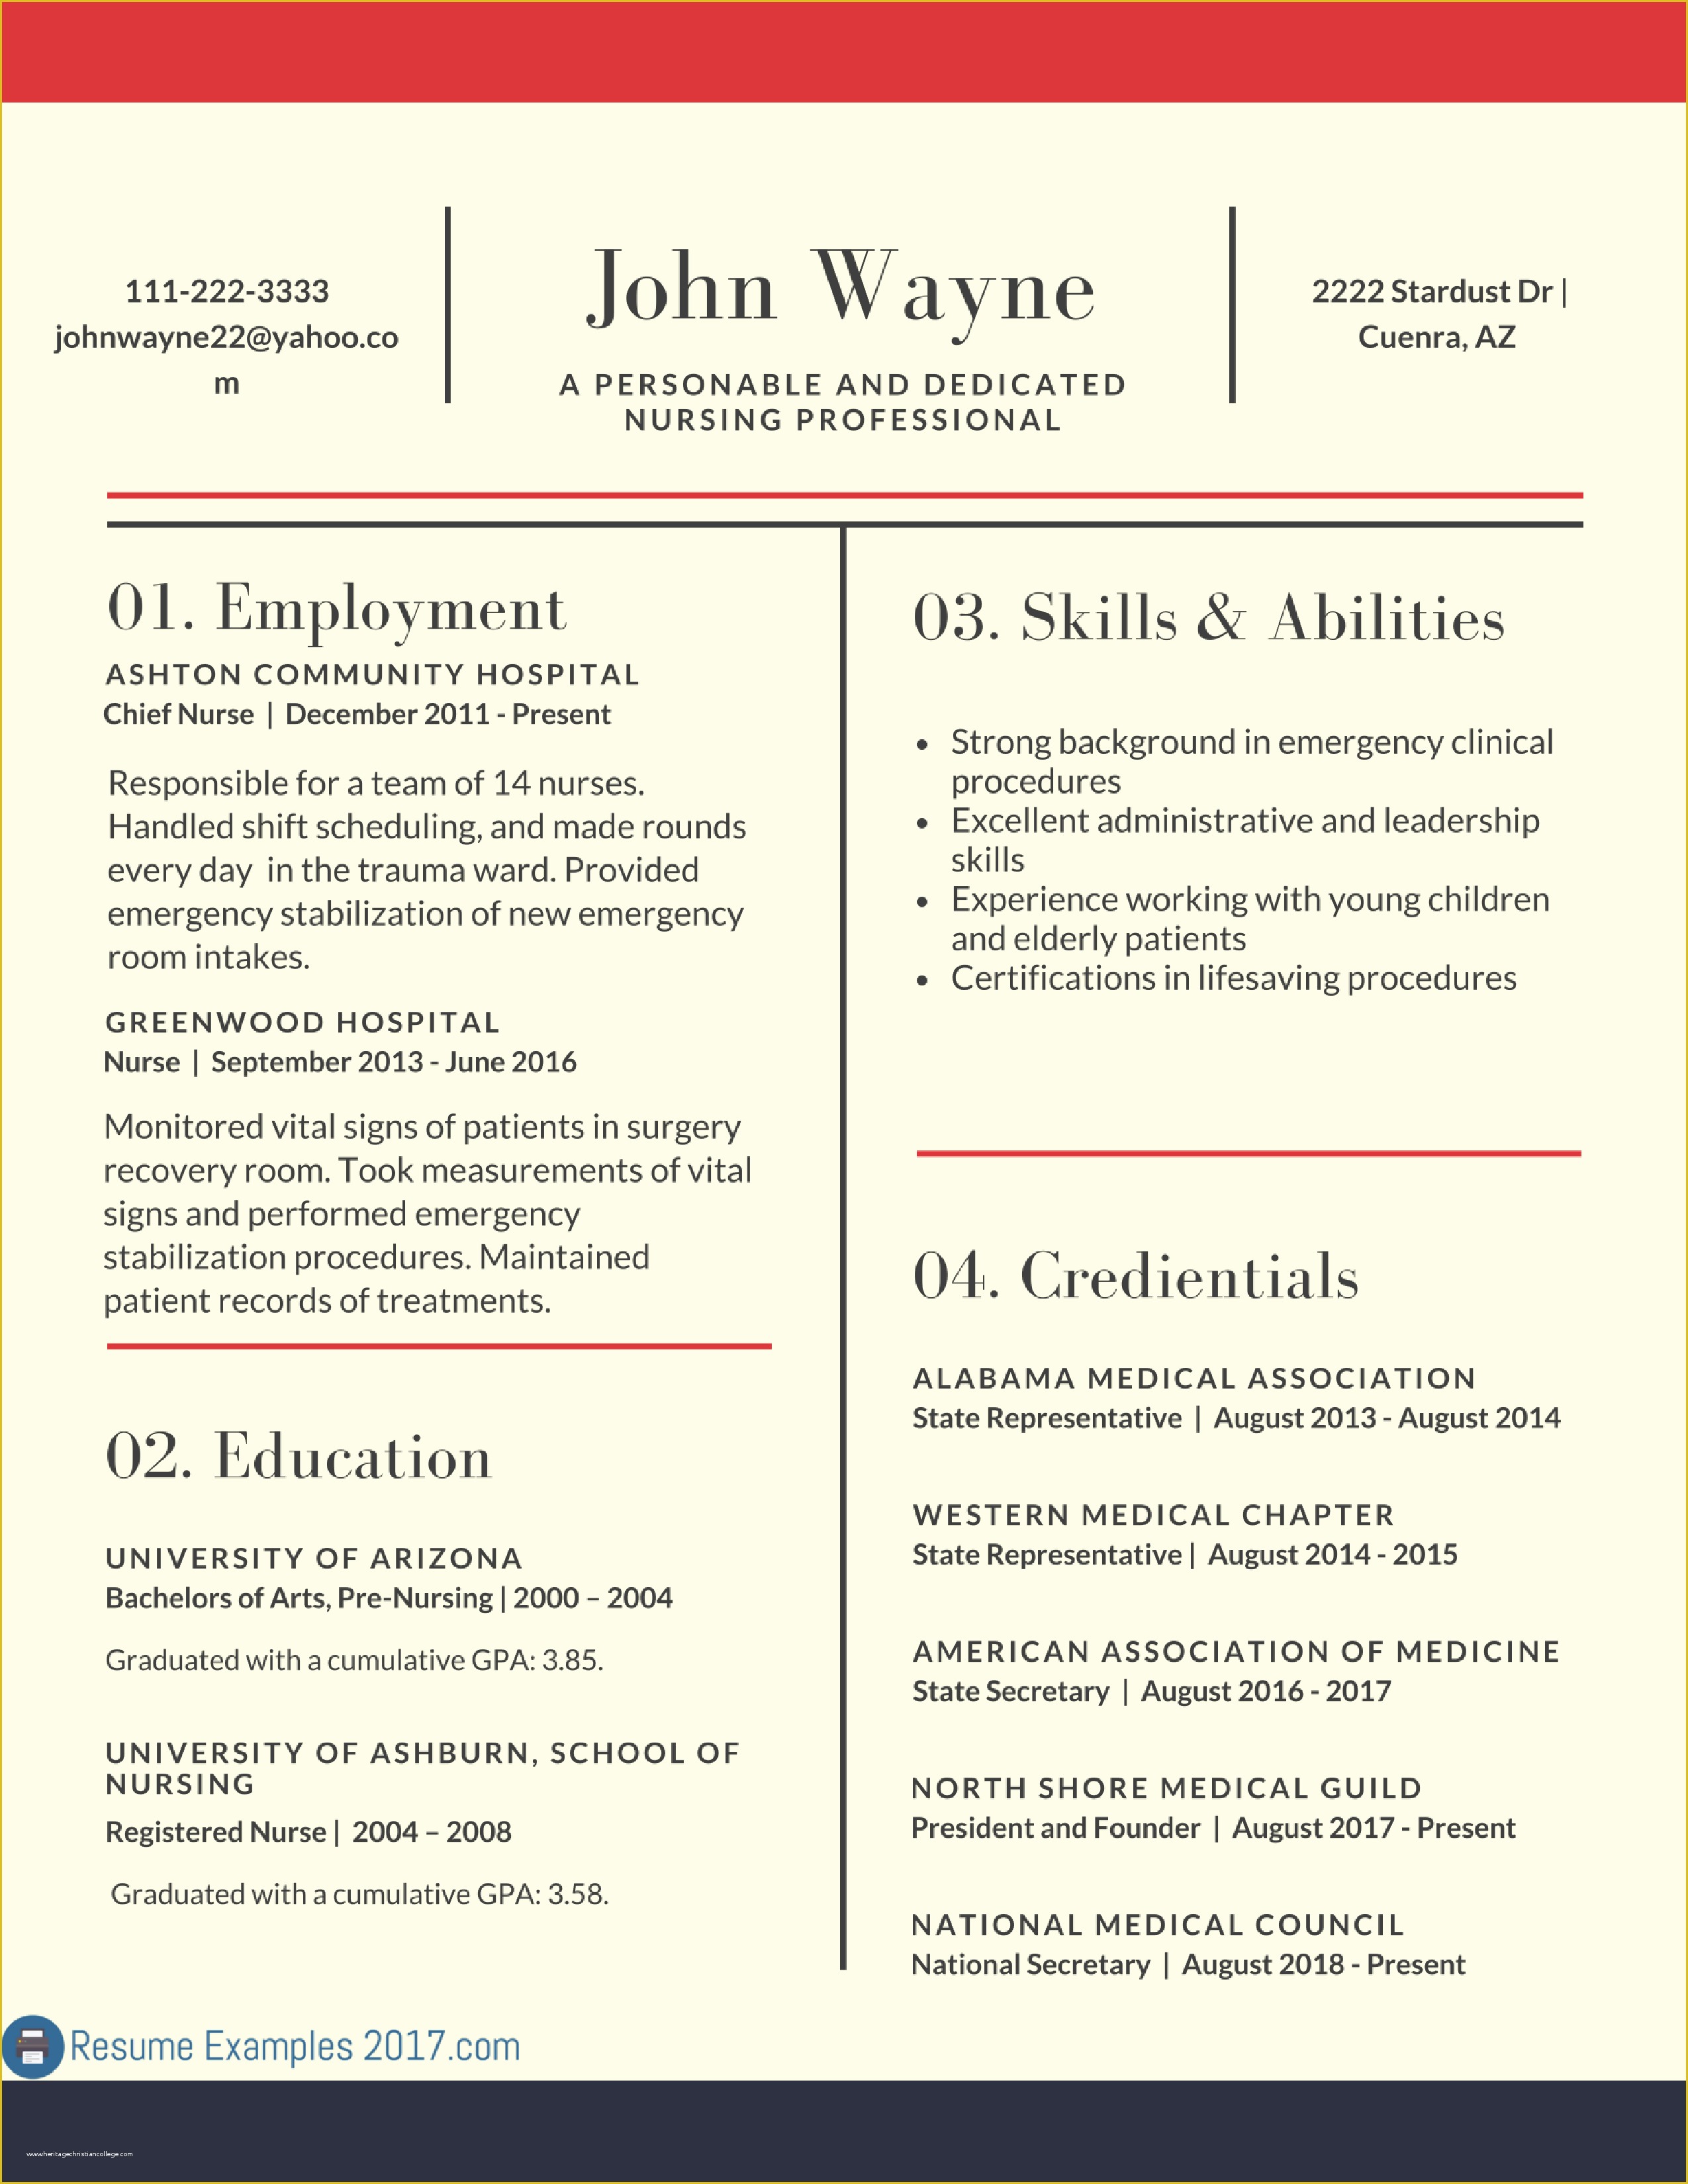 Best Free Resume Templates 2017 Of Our Updated Resume Examples 2018